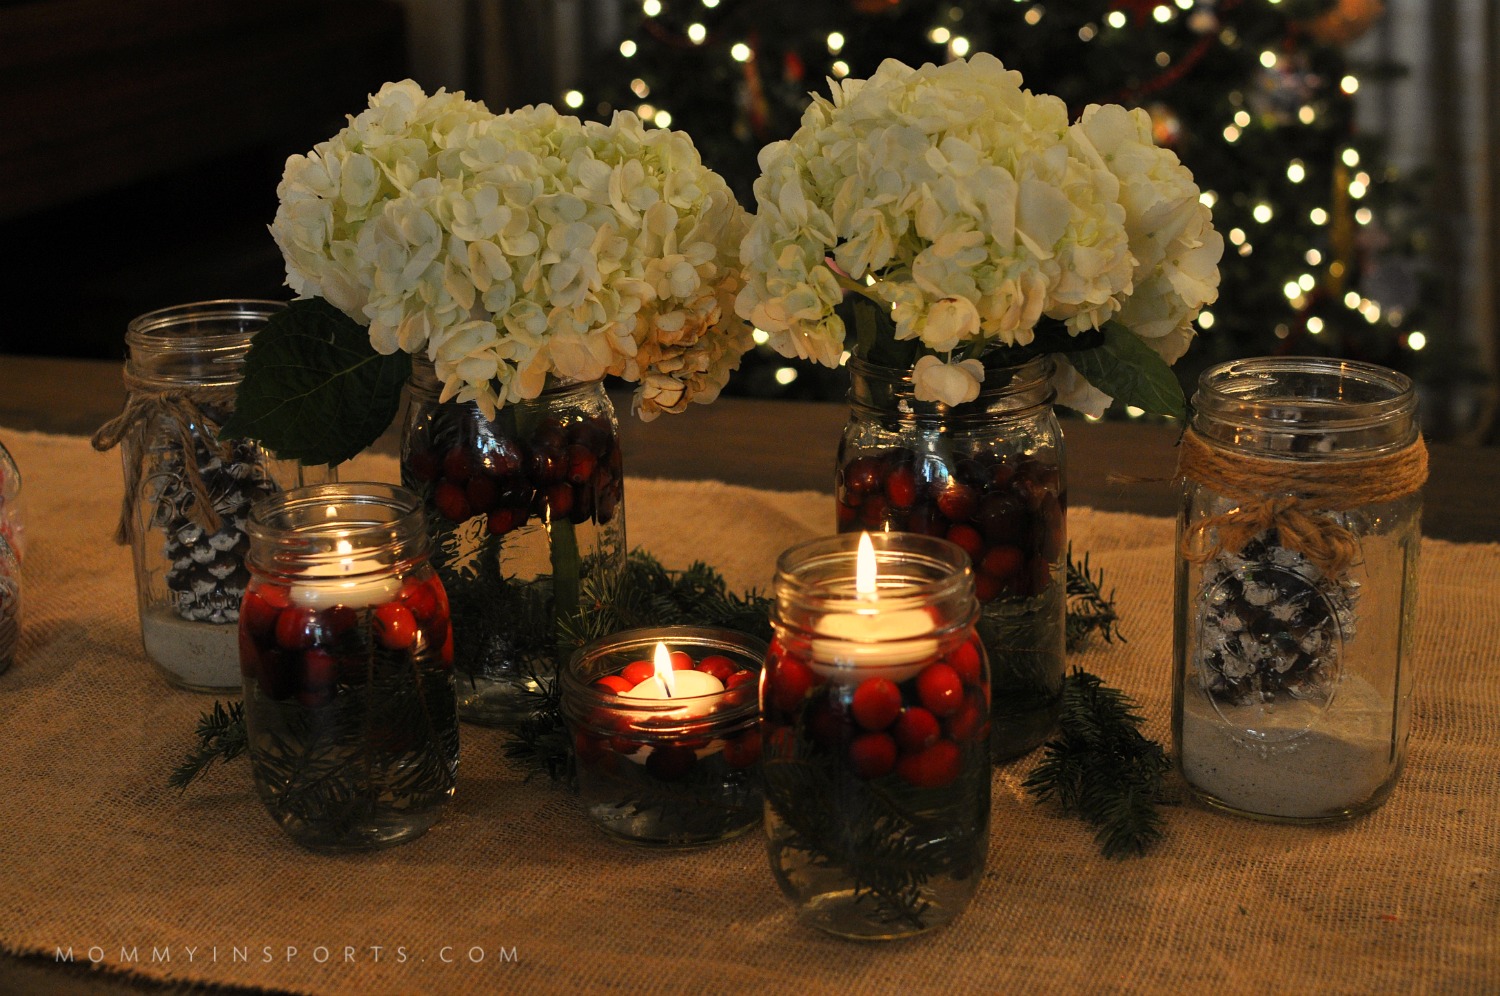 Mason Jars are perfect to use for a holiday centerpiece! Fill them with flowers, cranberries, evergreen clippings, or even pine cones!